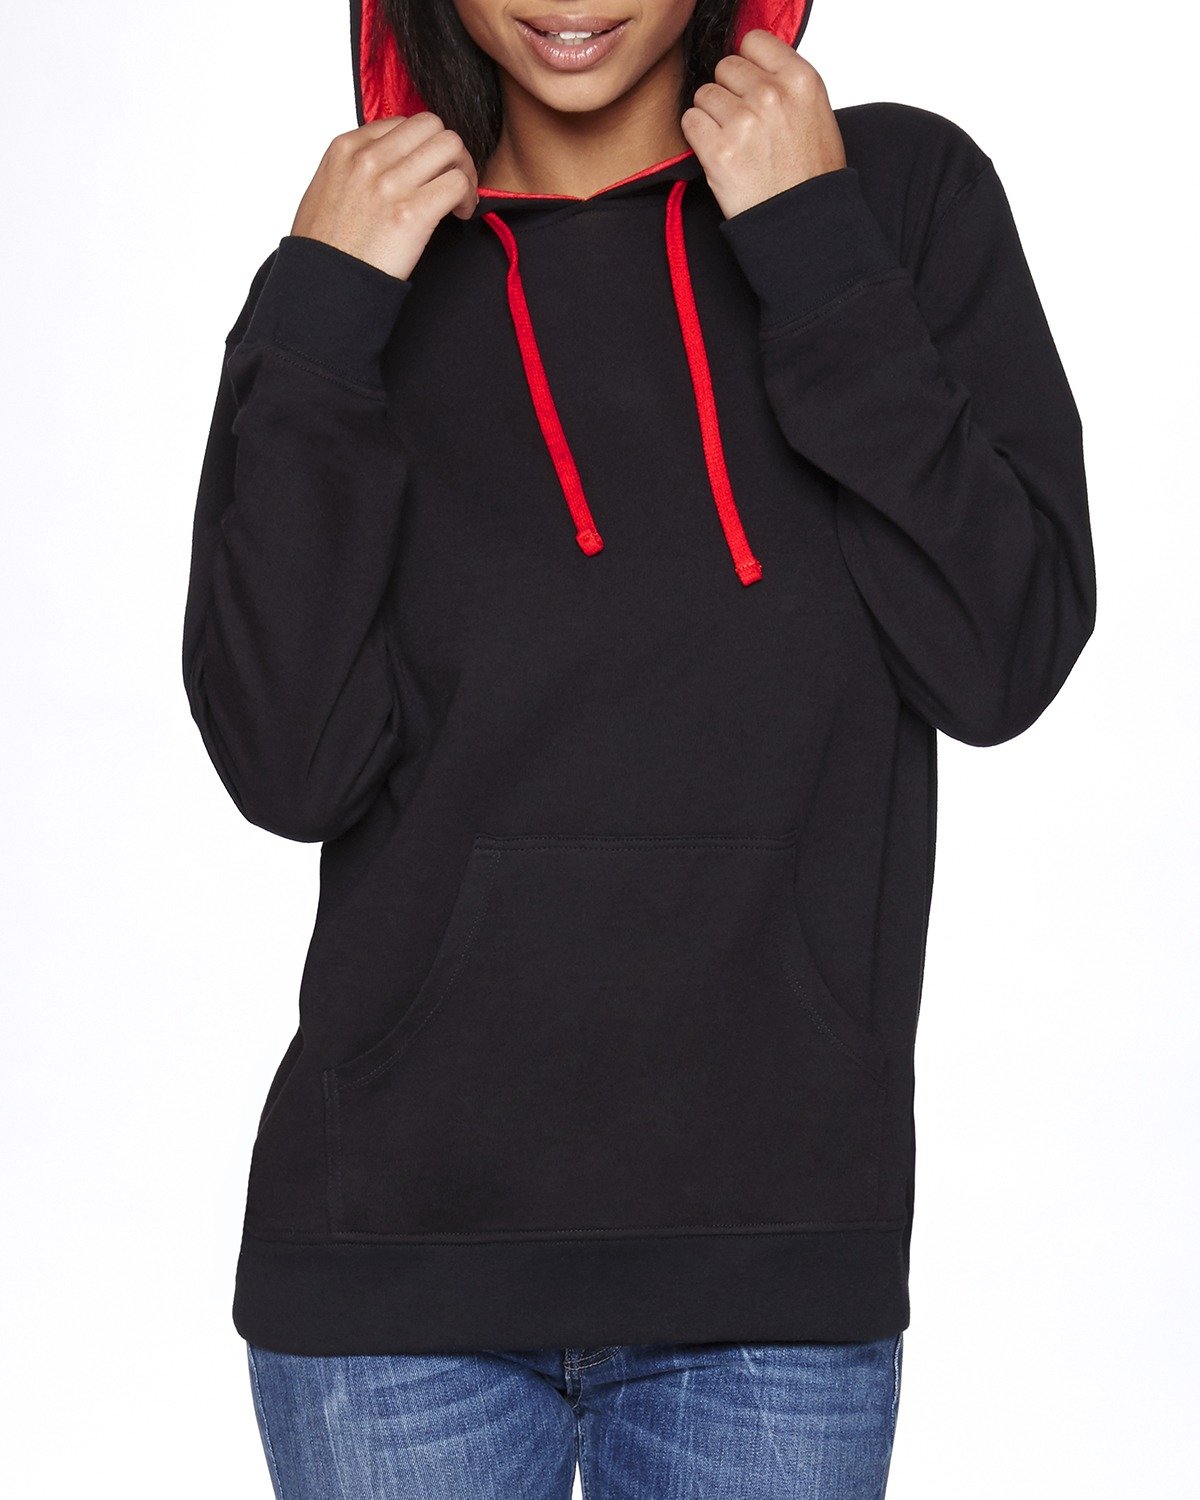 Next Level Unisex Laguna French Terry Pullover Hooded Sweatshirt BLACK/ RED 